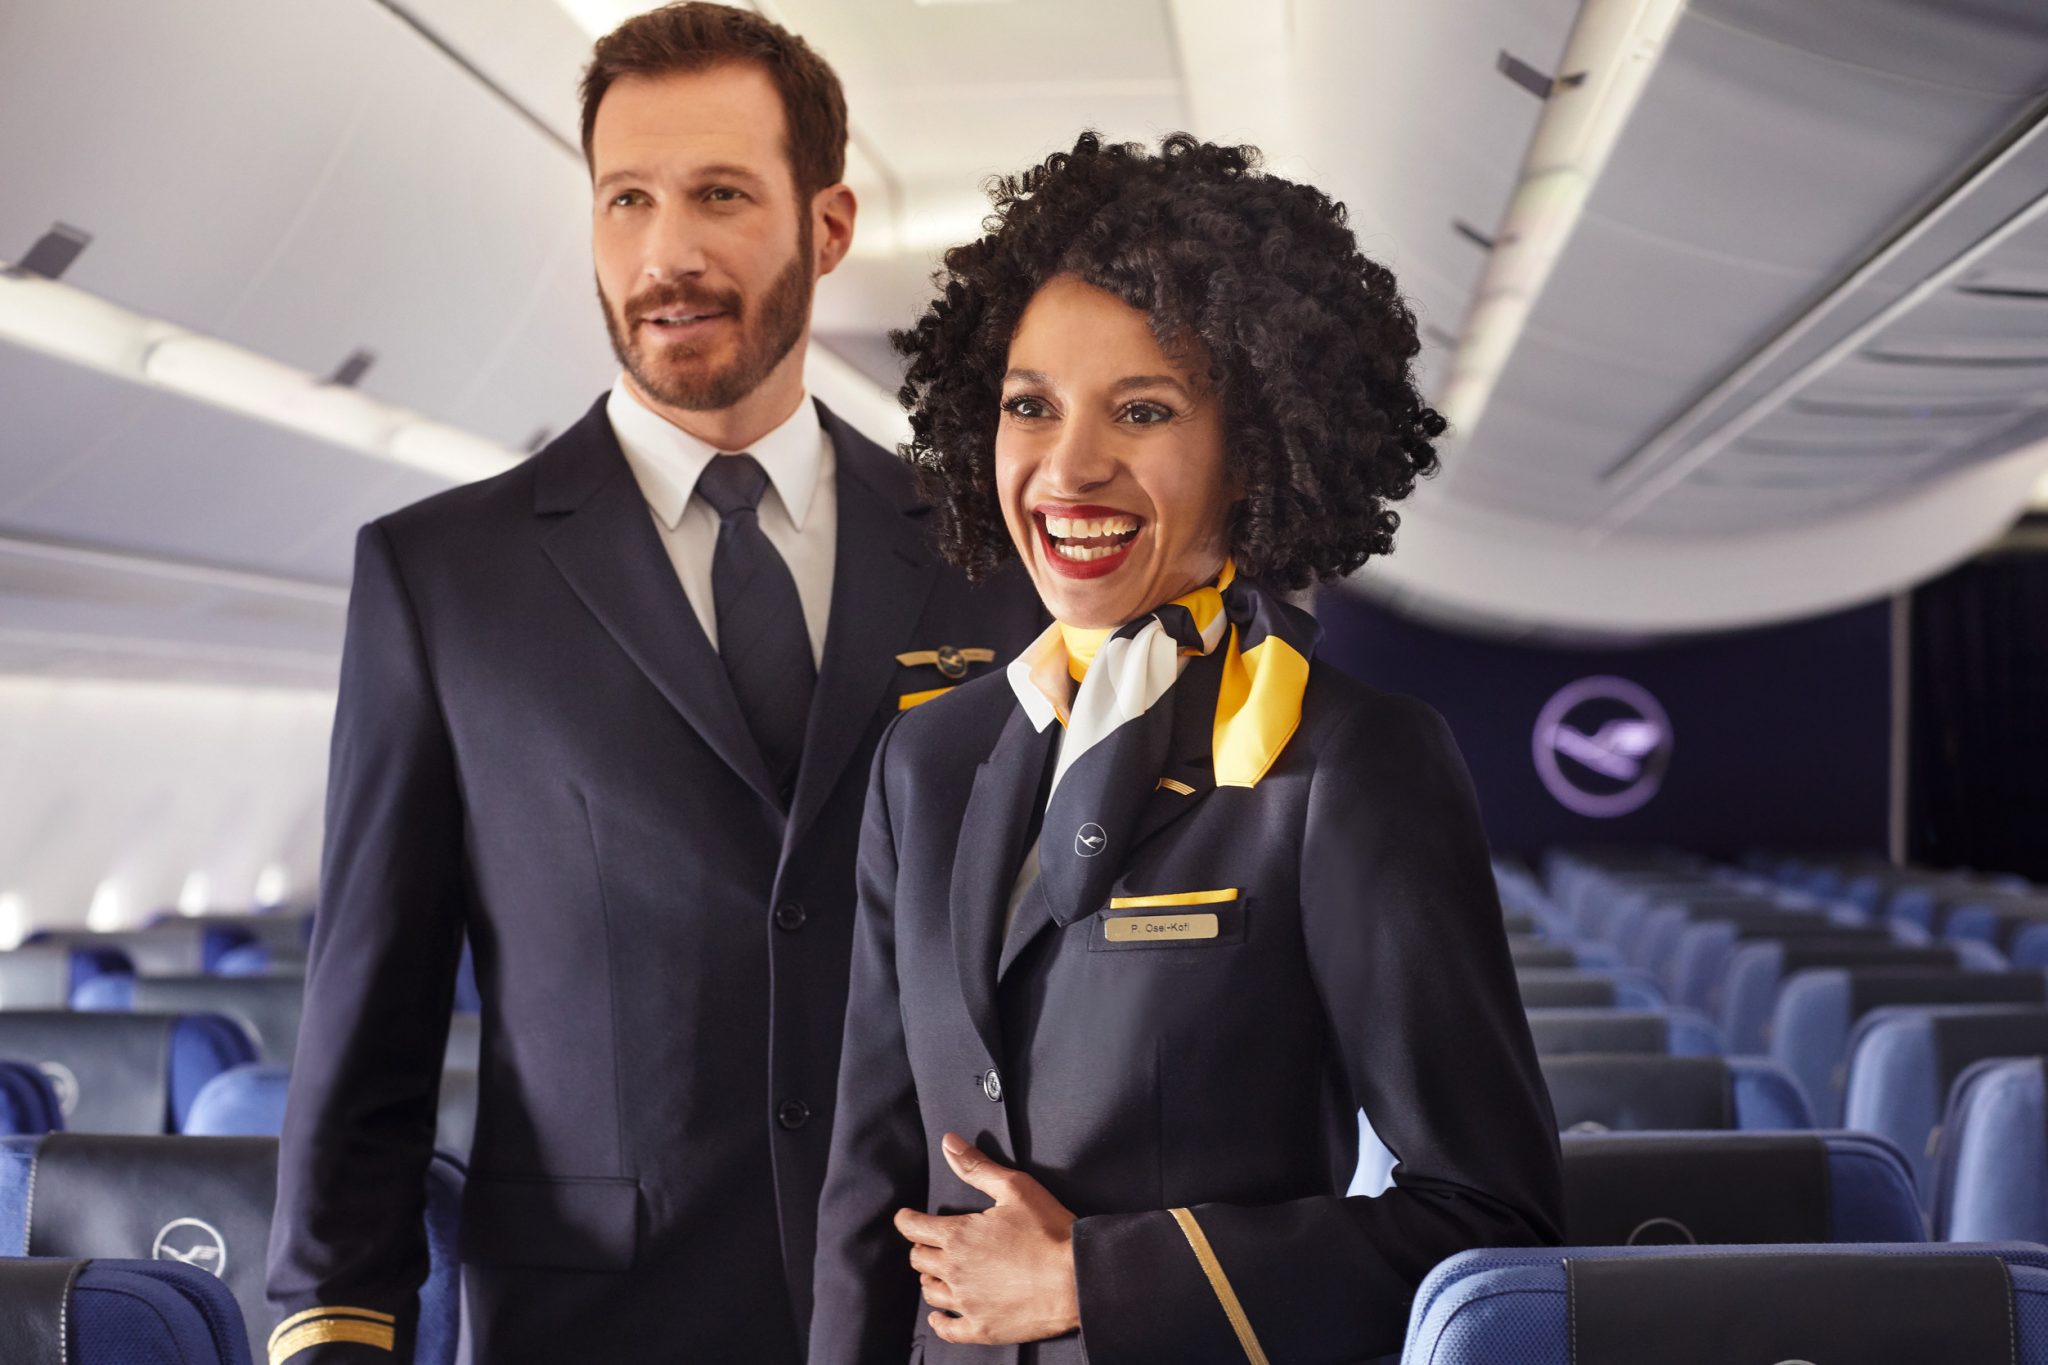 Lufthansa Will Hire 5,000 New Staff This Year - 1,300 of Which Will Be ...